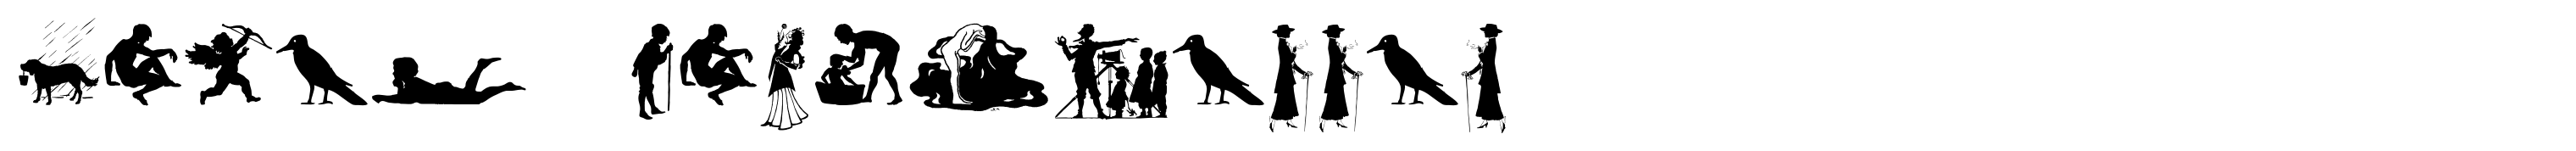 Mixed Silhouettes